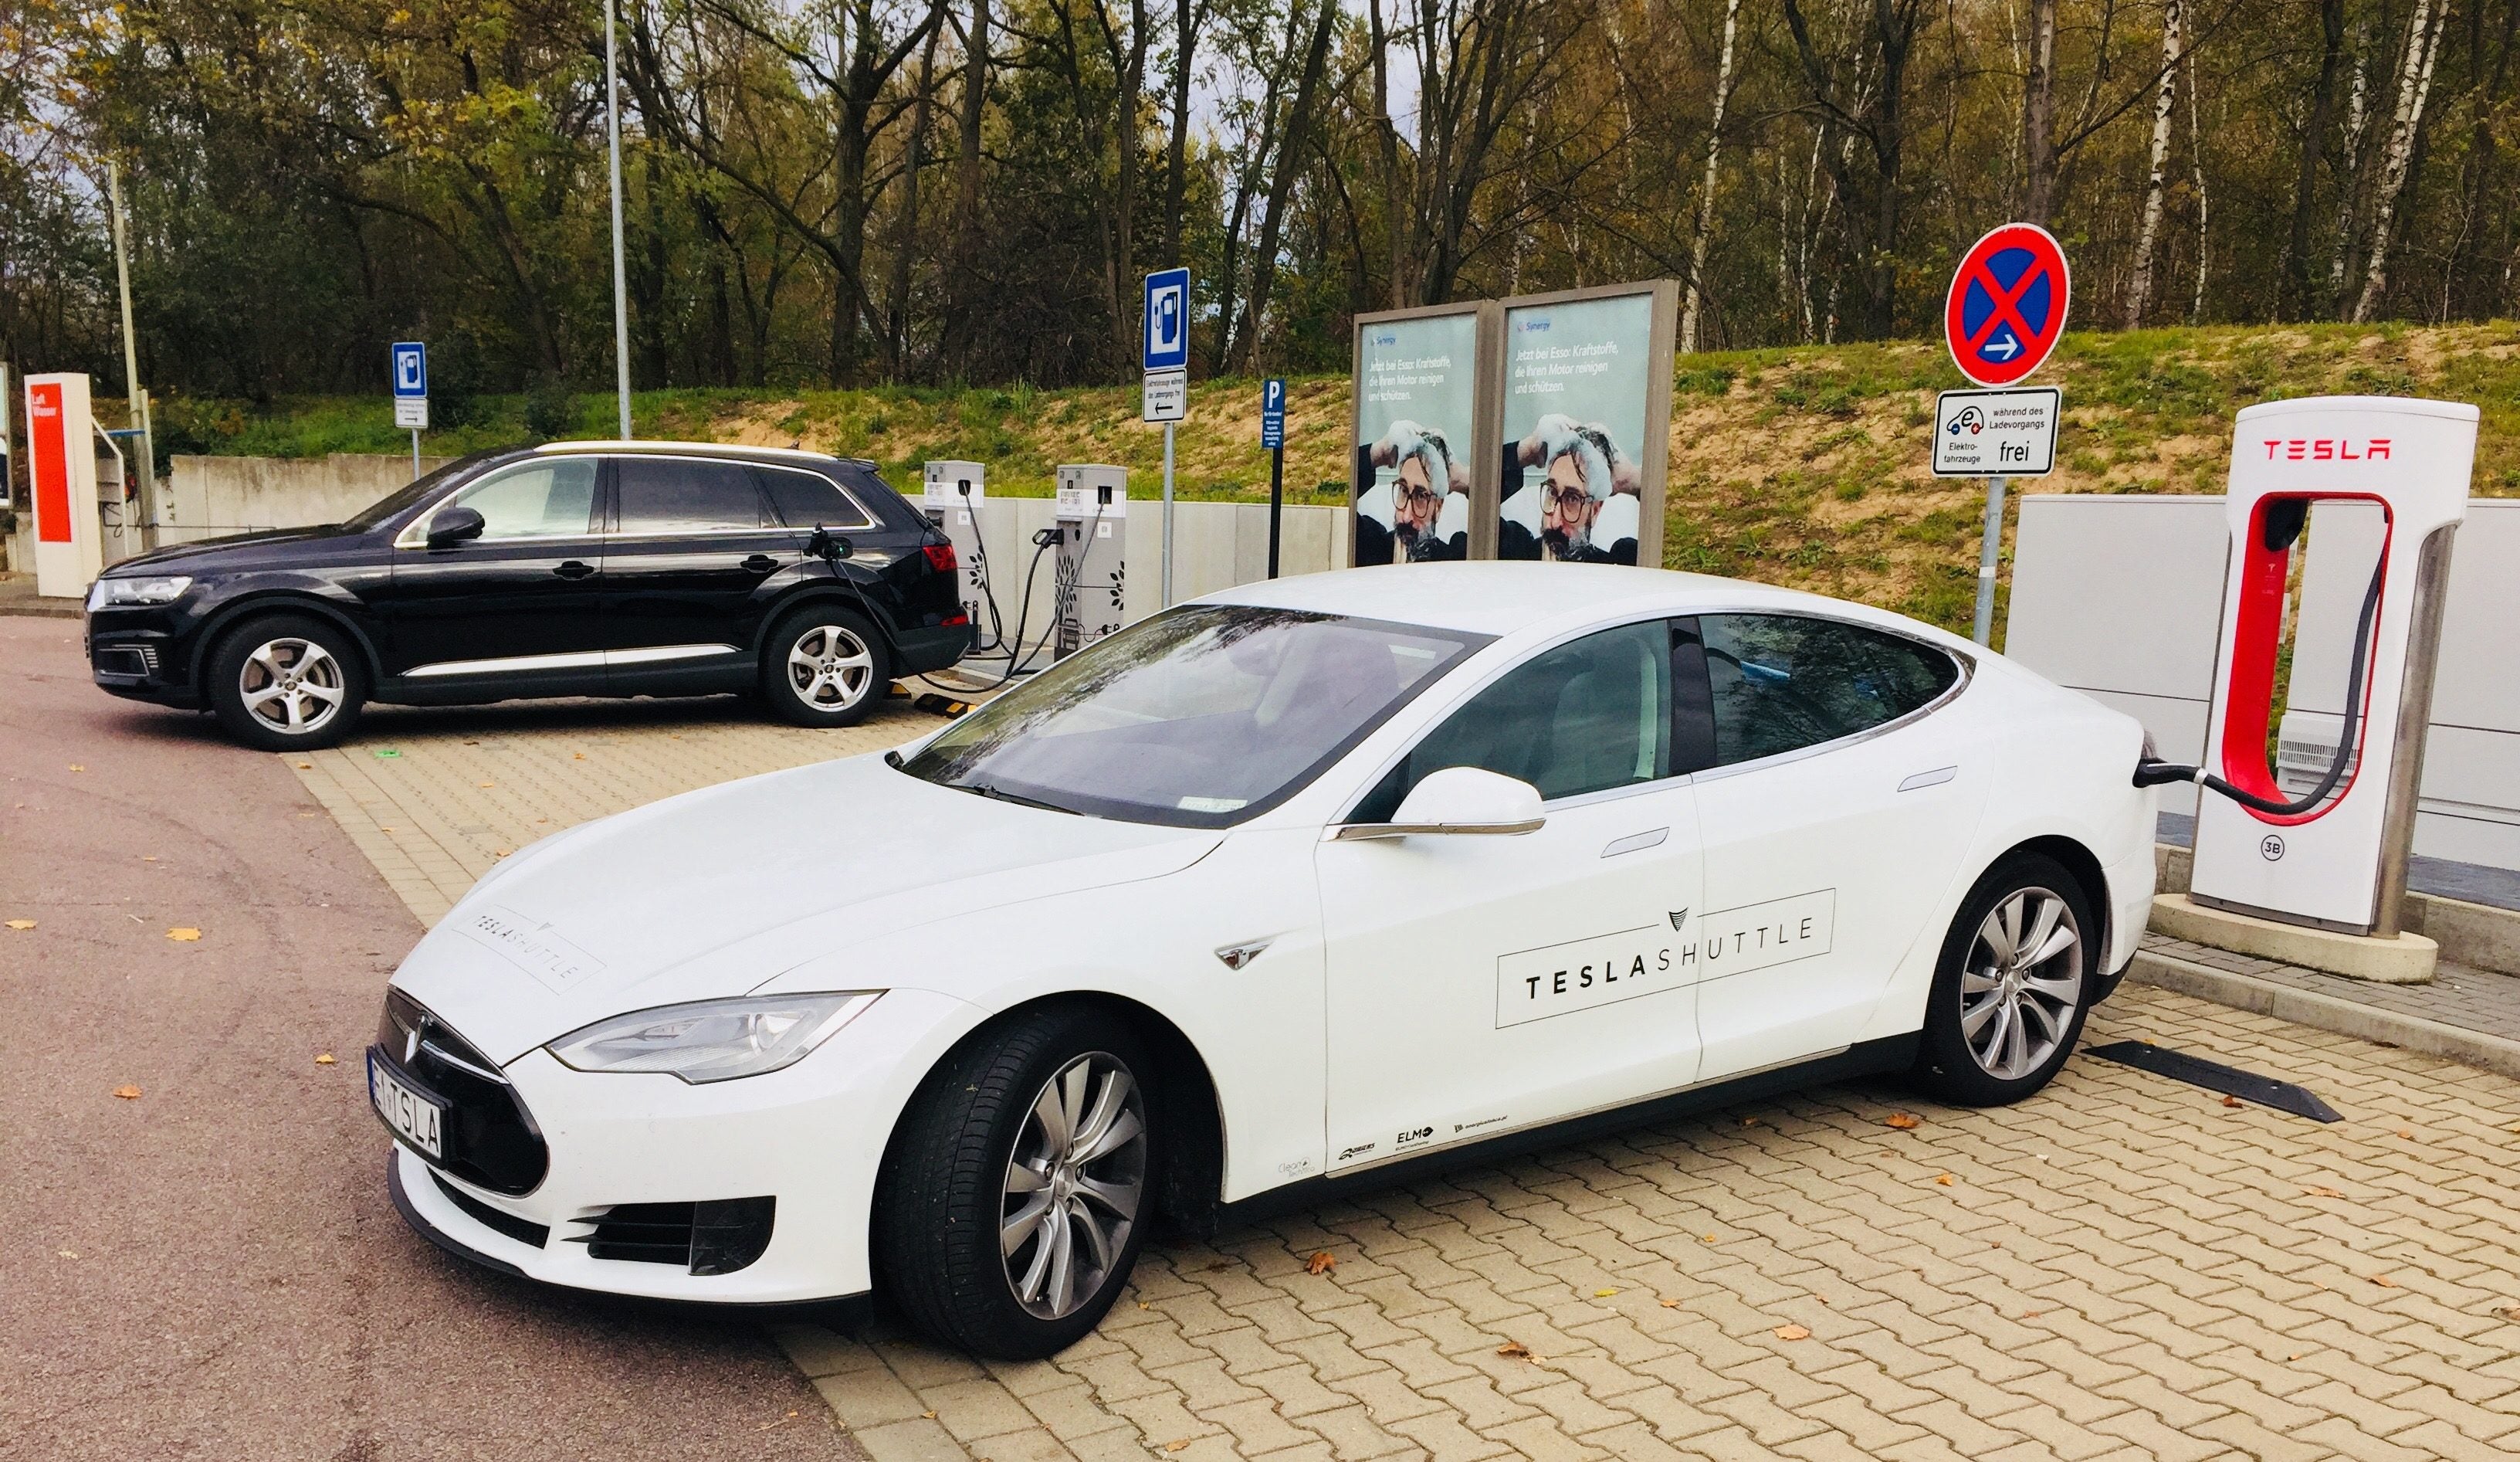 Rare plug-in vehicles charging in Germany. Photo credit: Tesla Shuttle | CleanTechnica